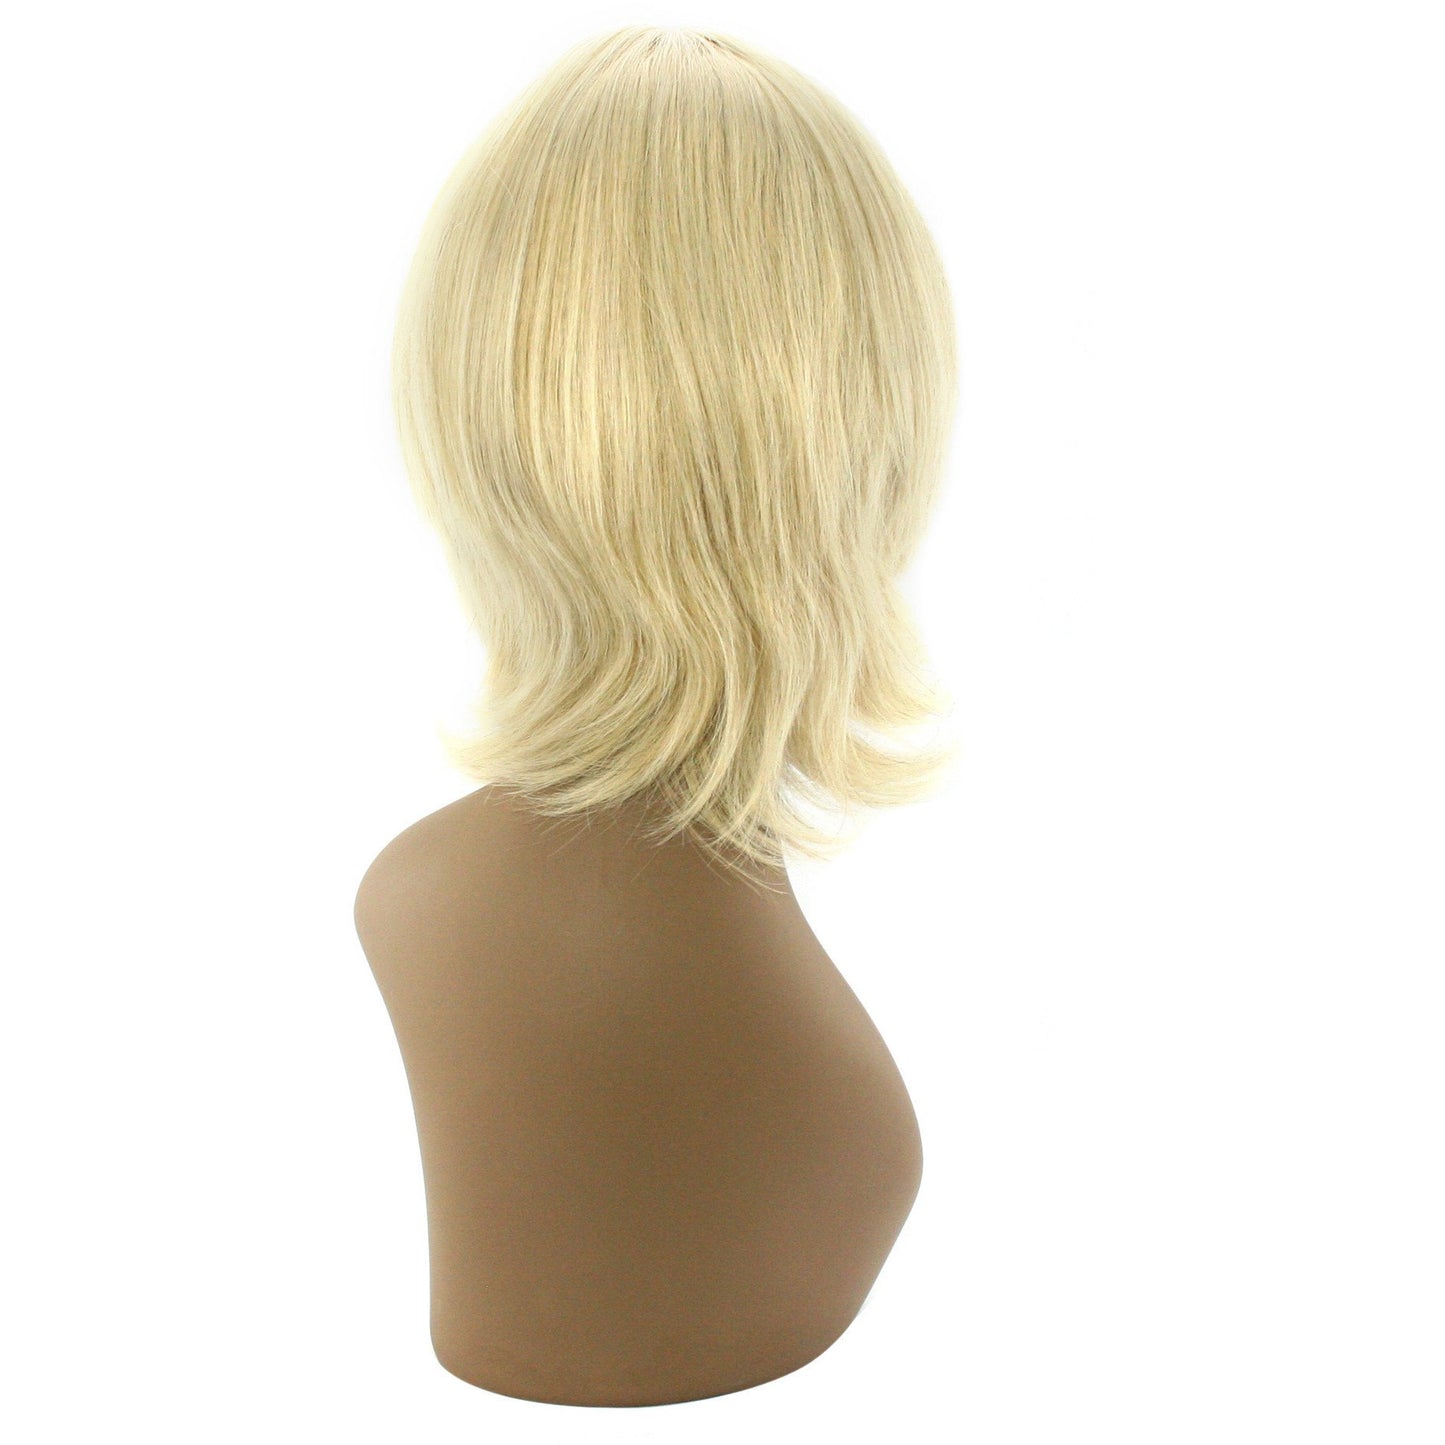 Unique's 100% Human Hair Full Wig / Style "H" - BeautyGiant USA